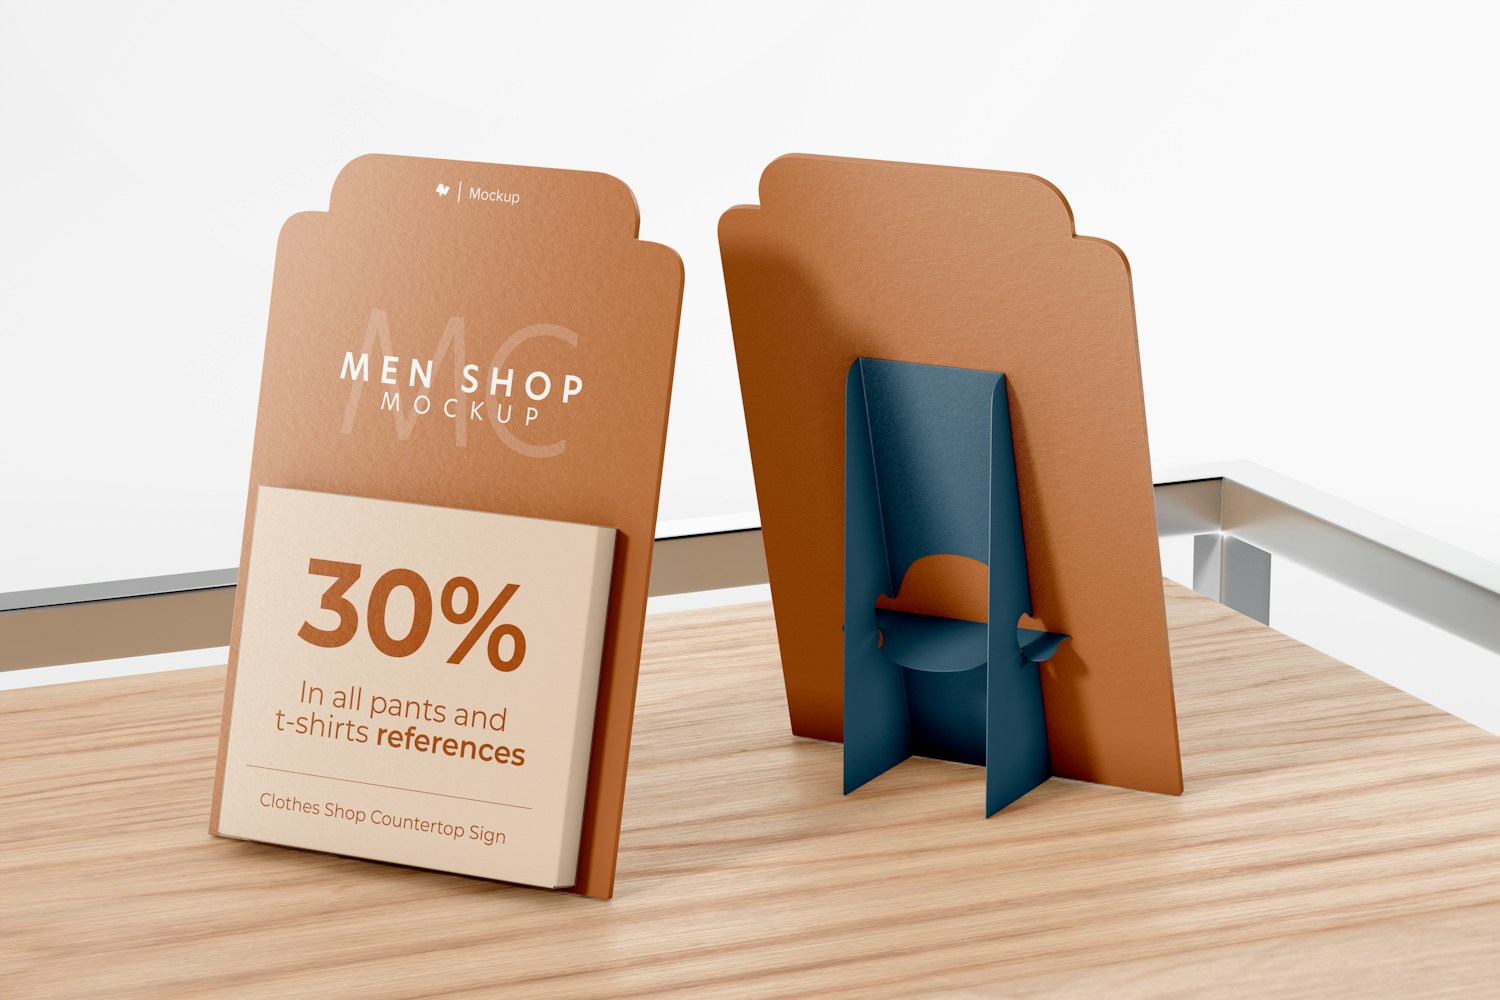 Clothes Shop Countertop Signs Mockup, on Surface